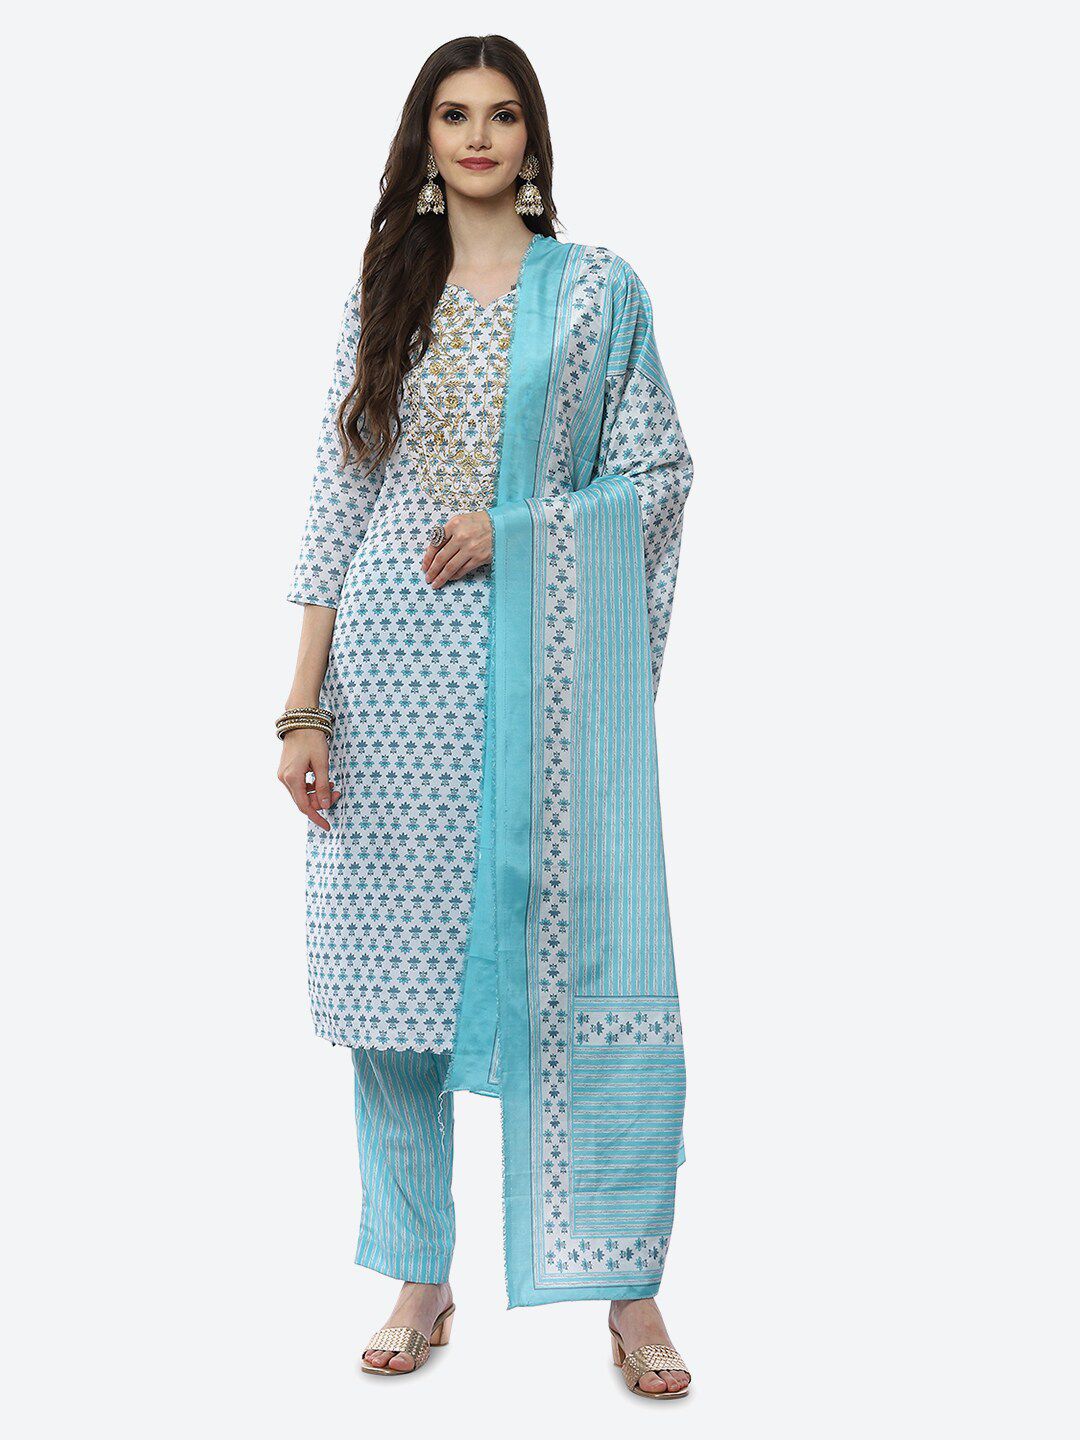 Biba Blue & White Printed Unstitched Dress Material Price in India